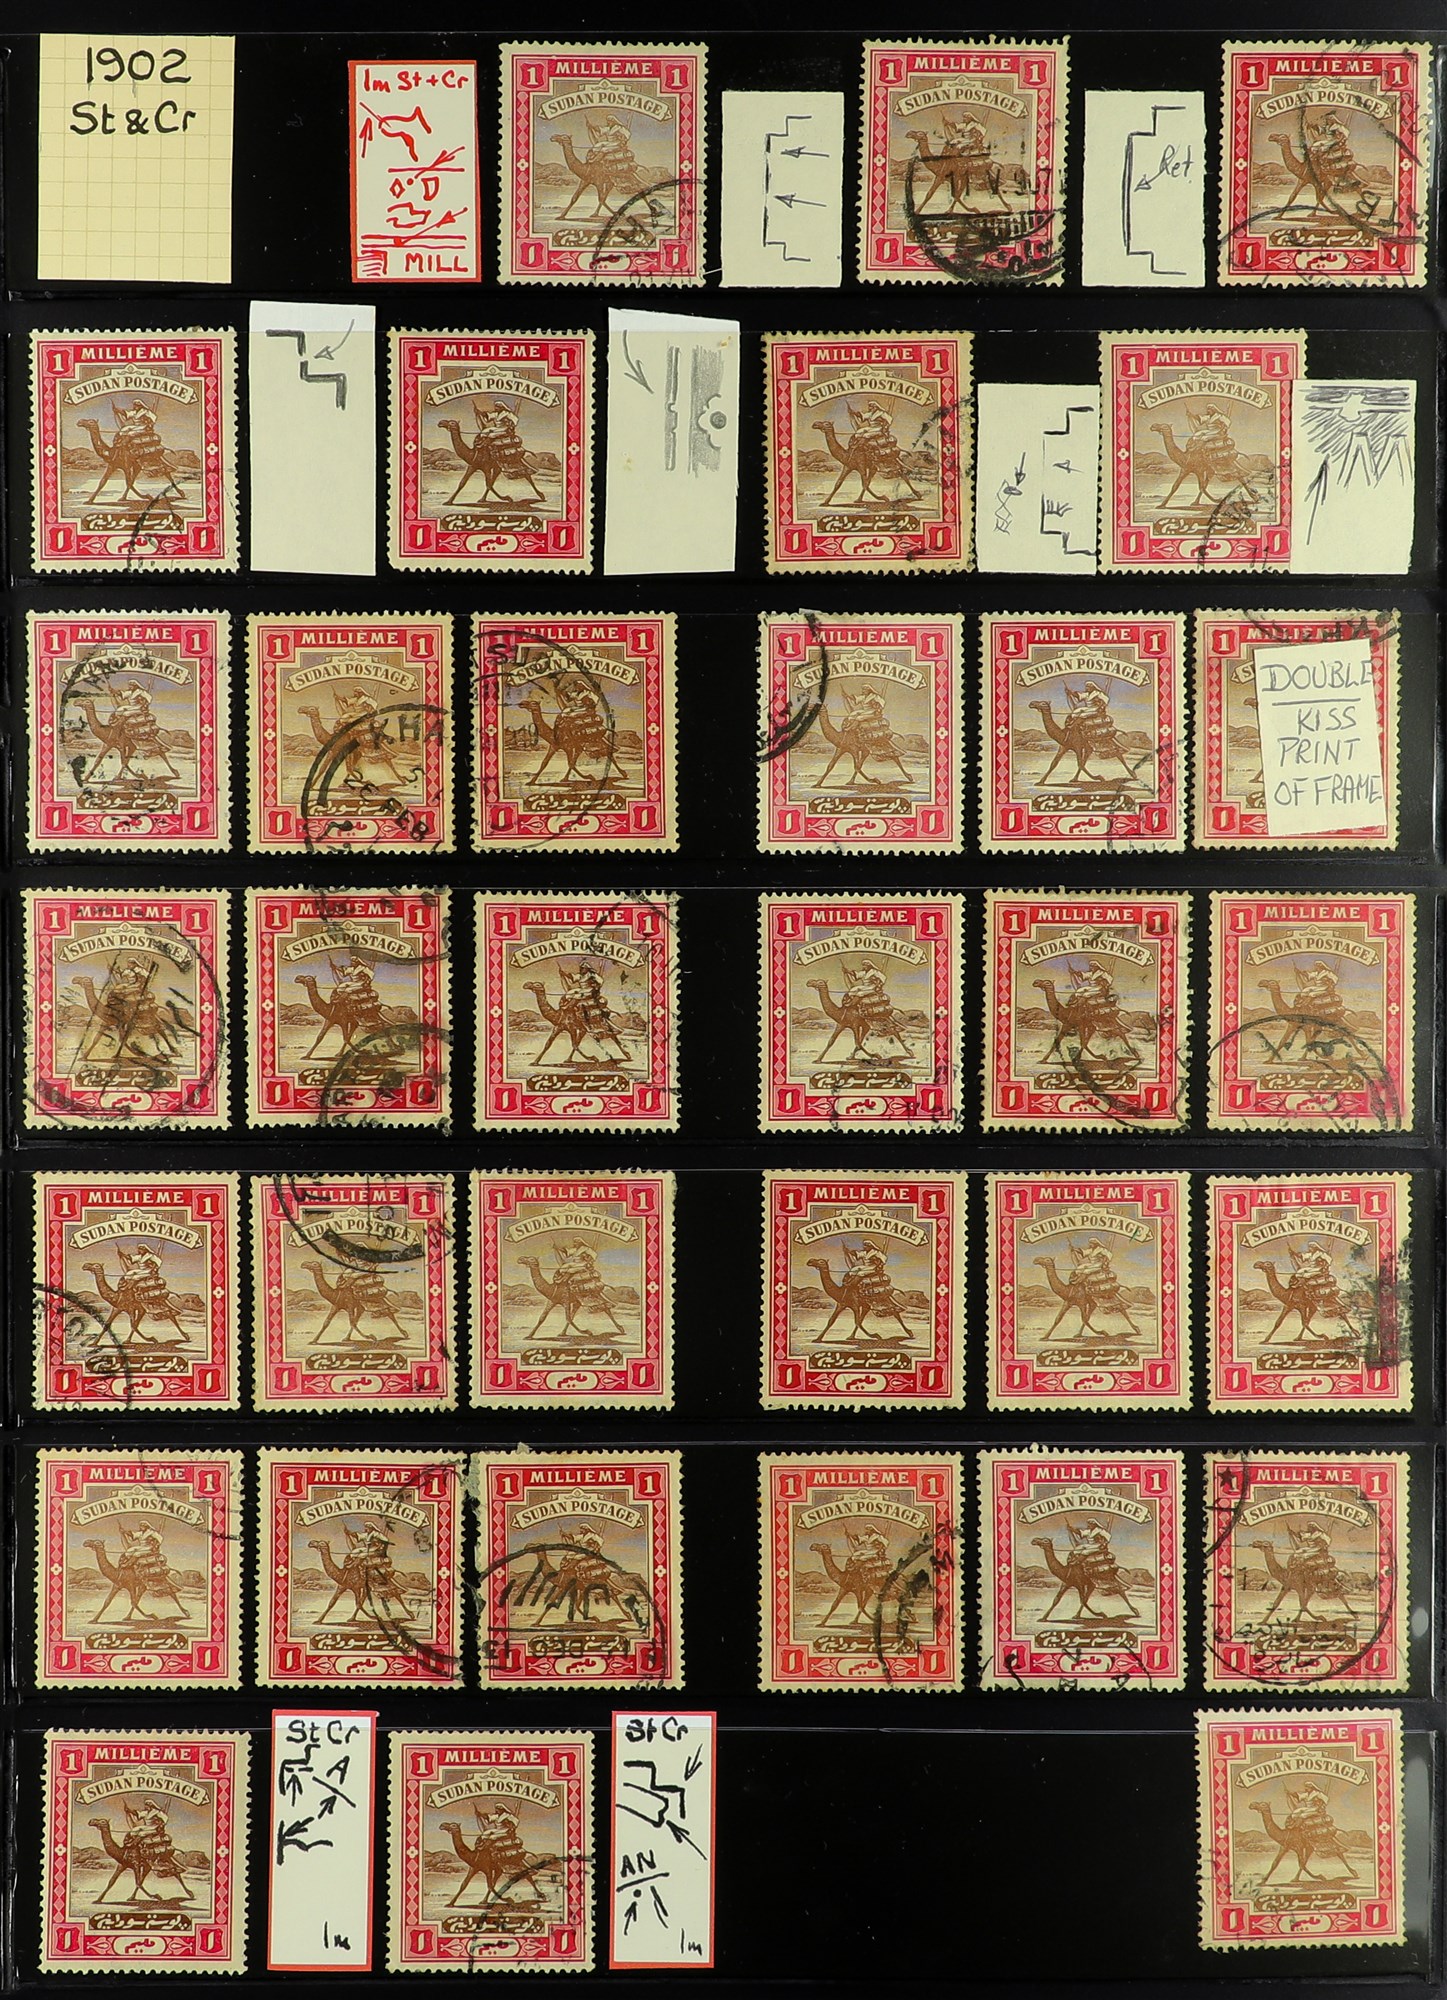 SUDAN 1898 - 1954 SPECIALISED USED RANGES IN 5 ALBUMS. Around 12,000 used stamps with many - Image 3 of 41